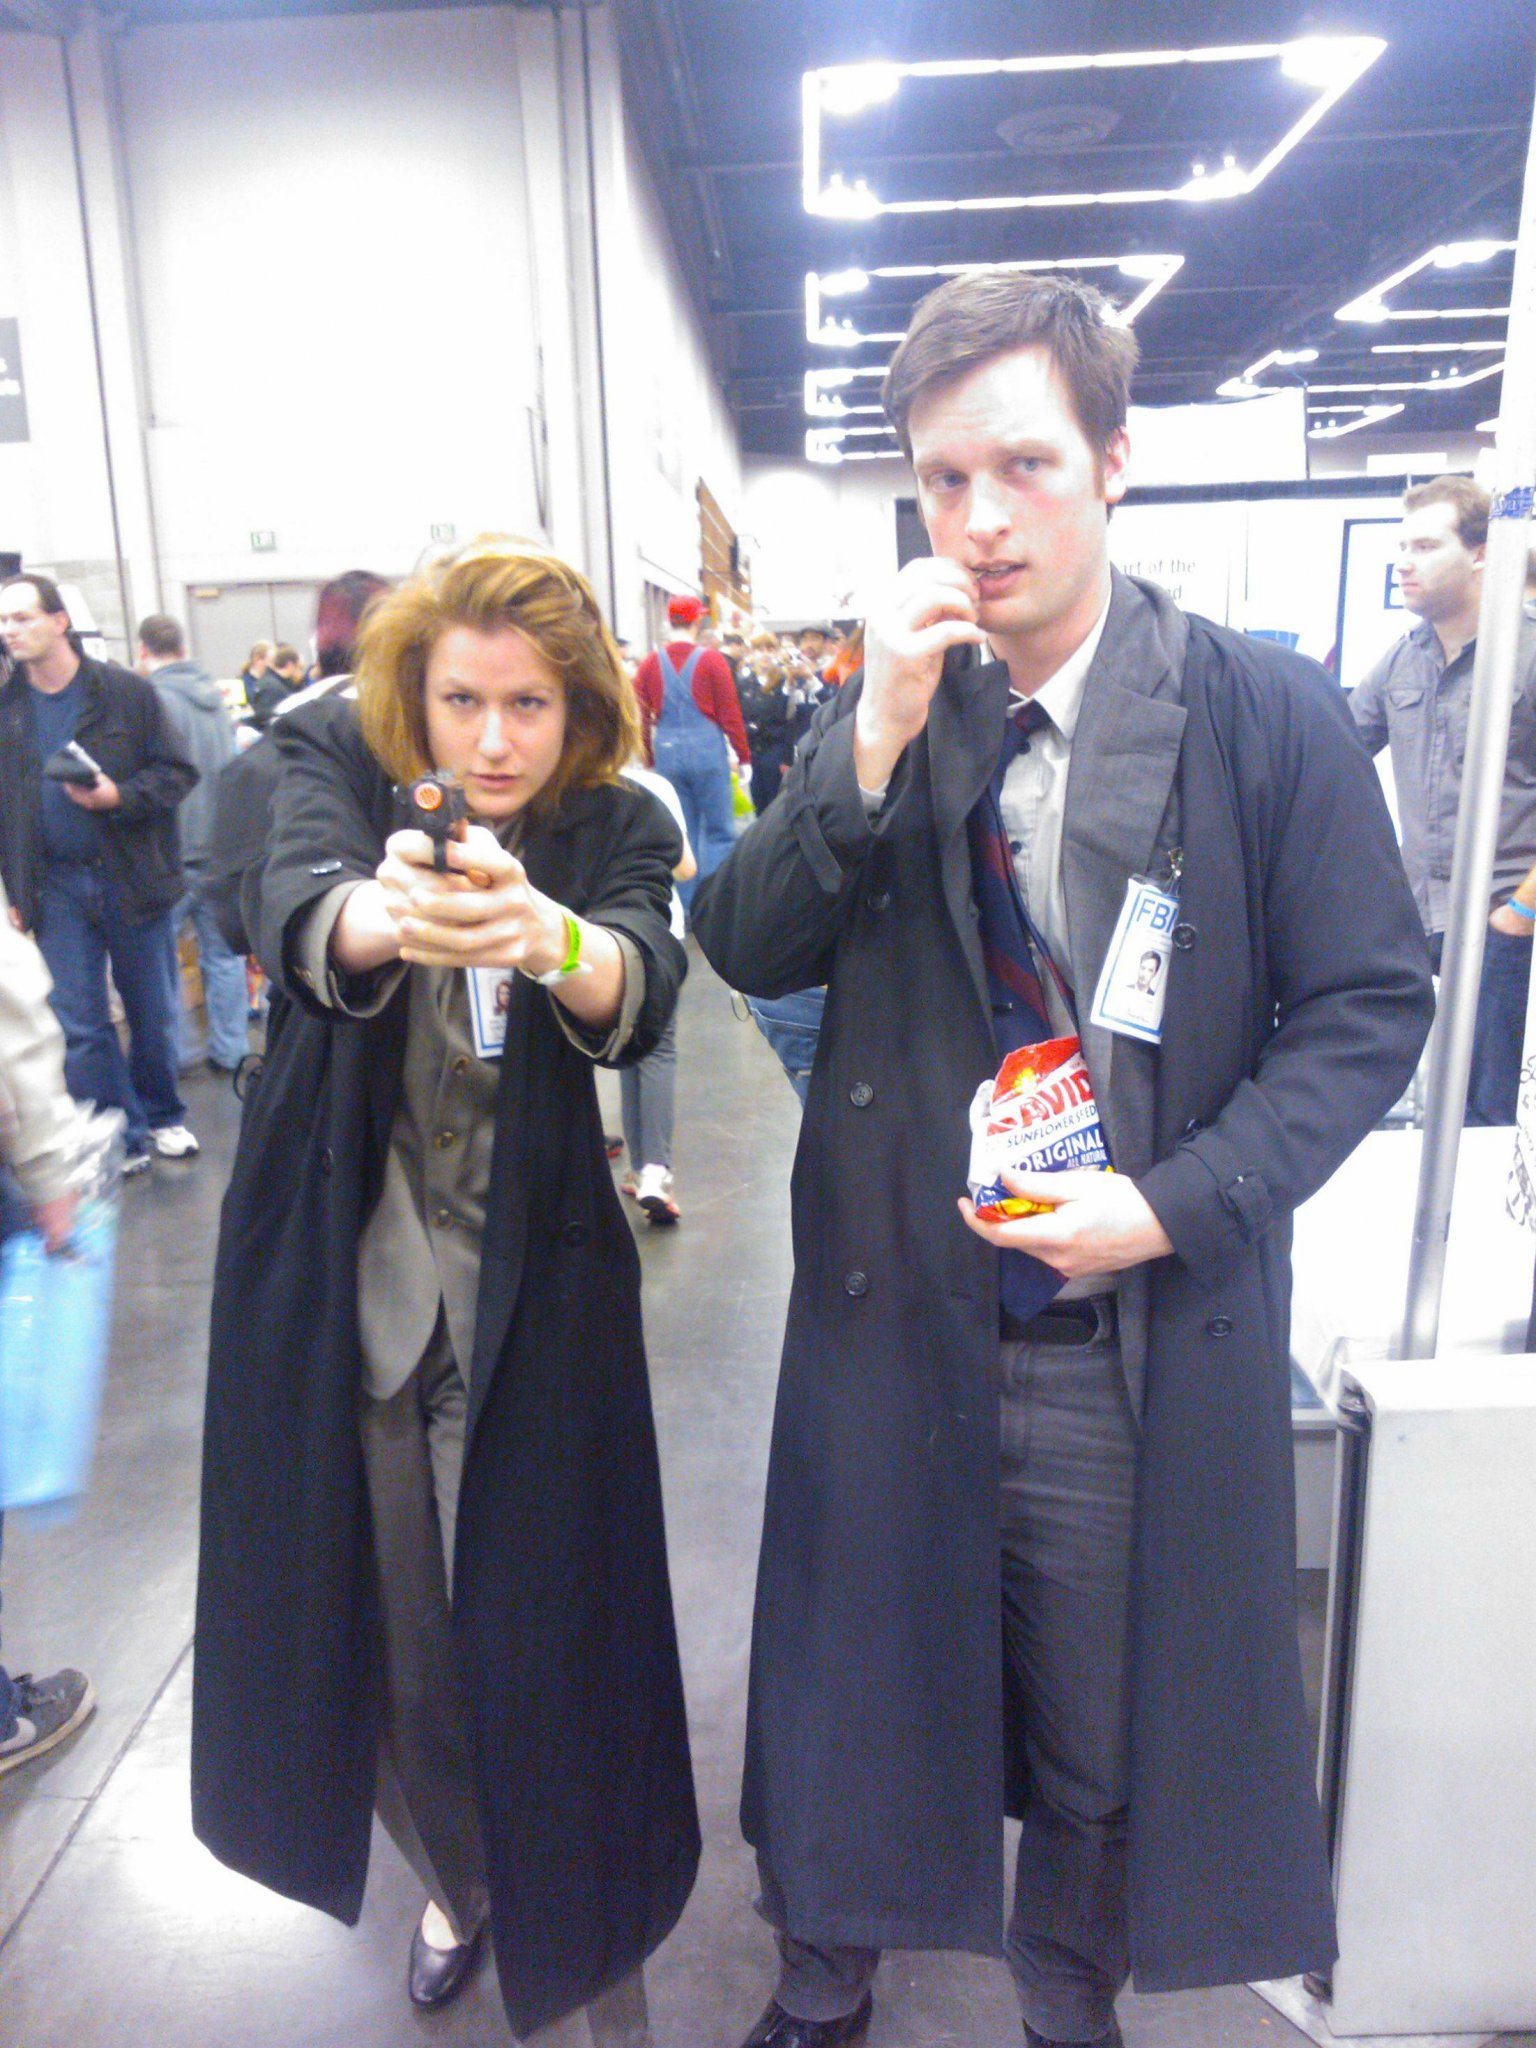 Nerdy Halloween Costume X-Files Mulder and Scully